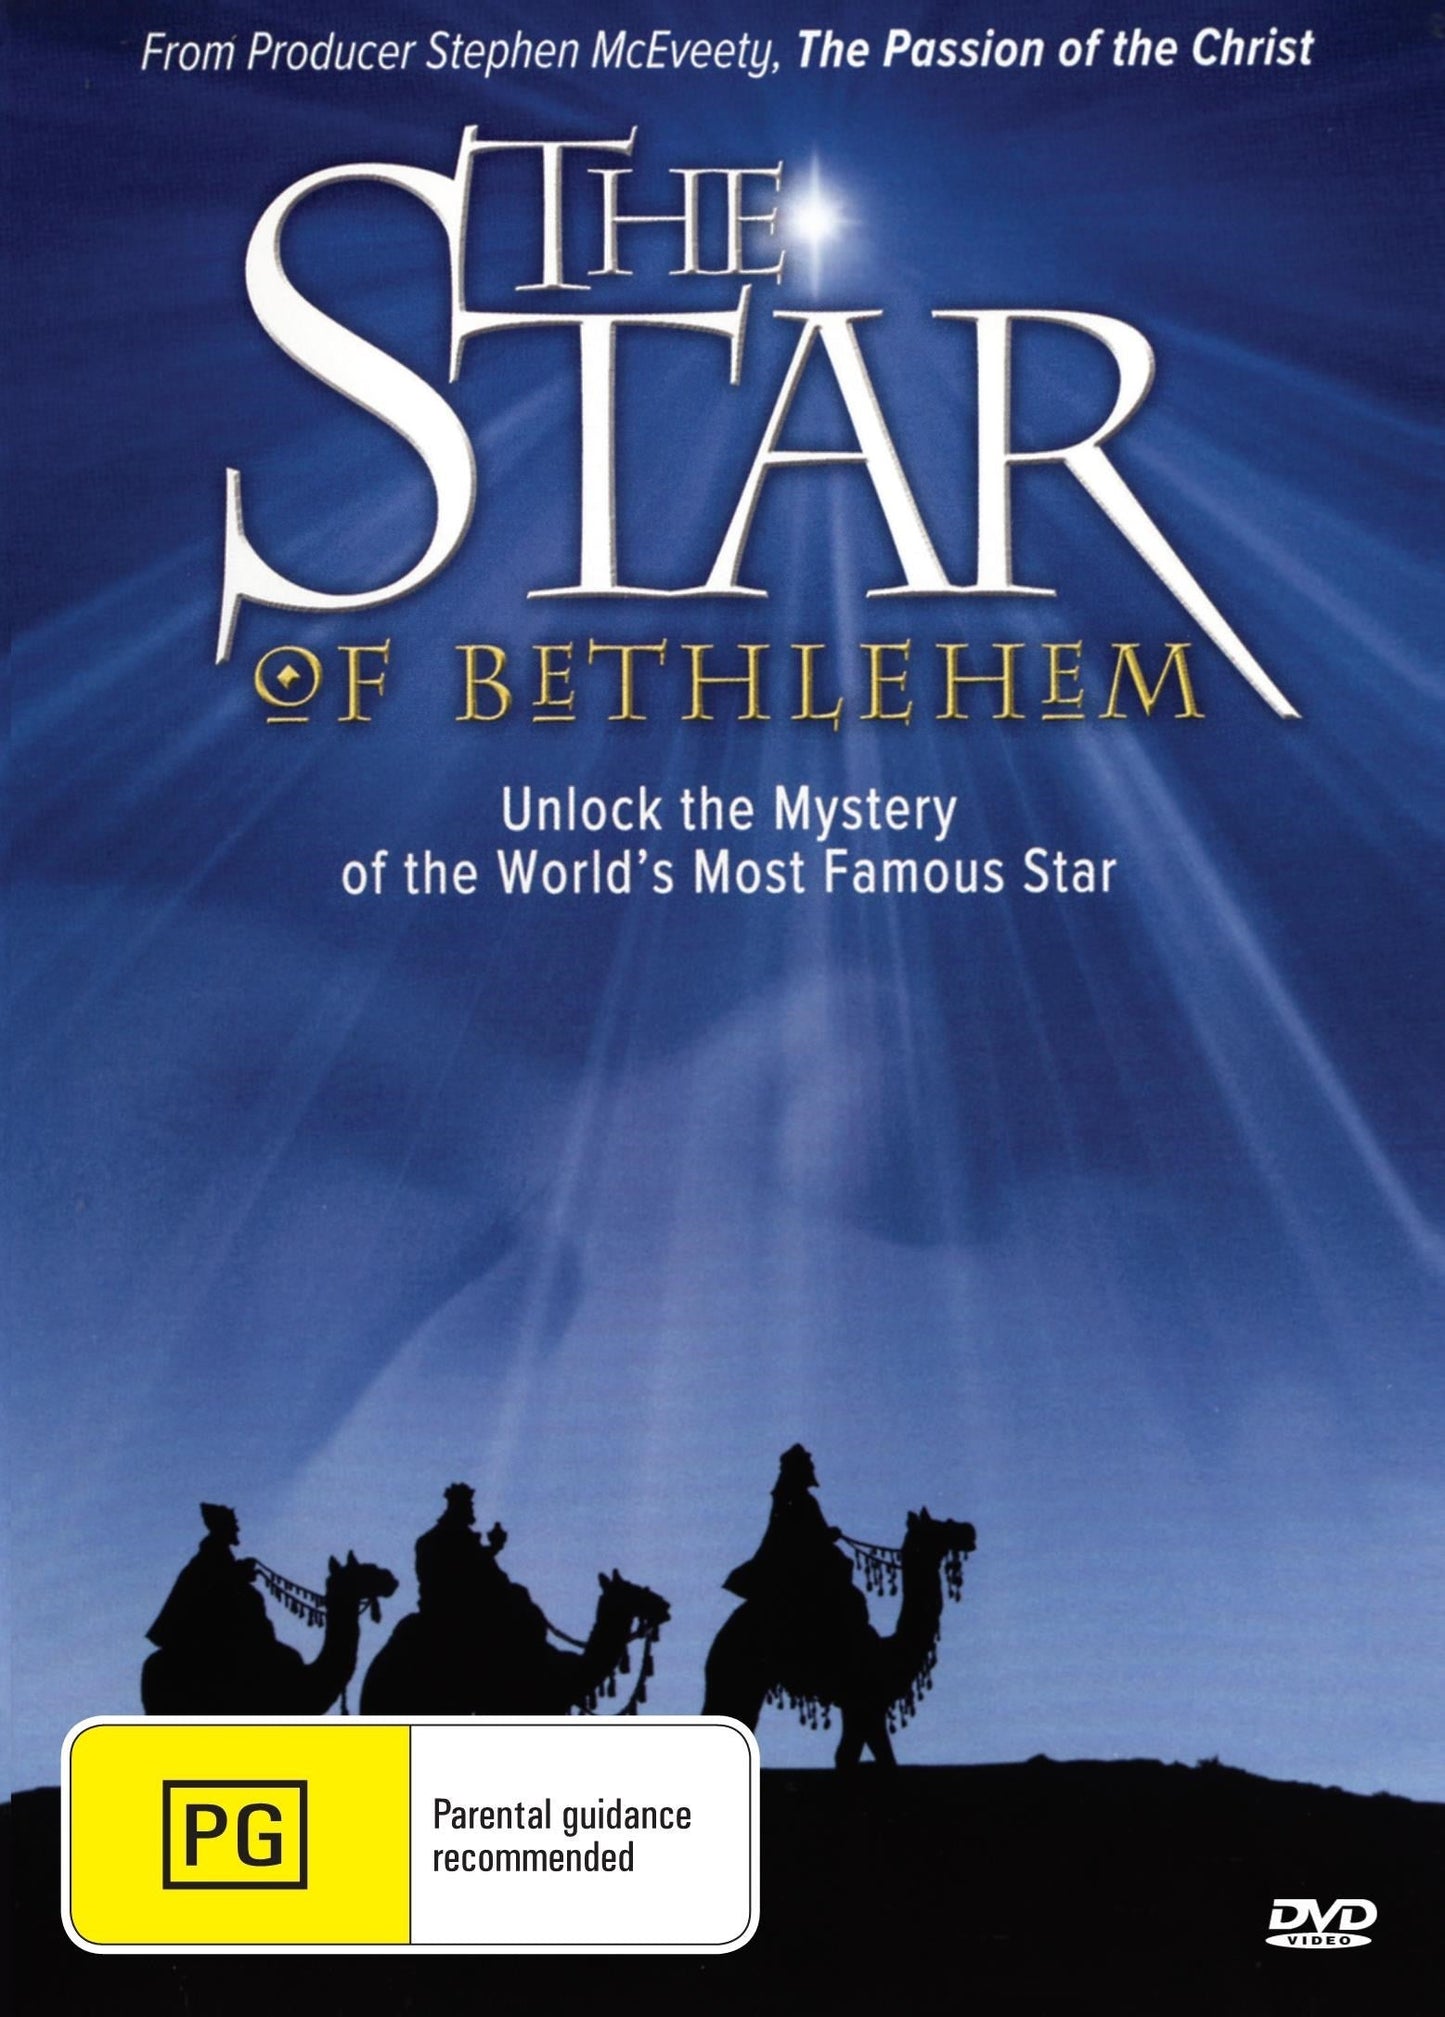 The Star of Bethlehem rareandcollectibledvds